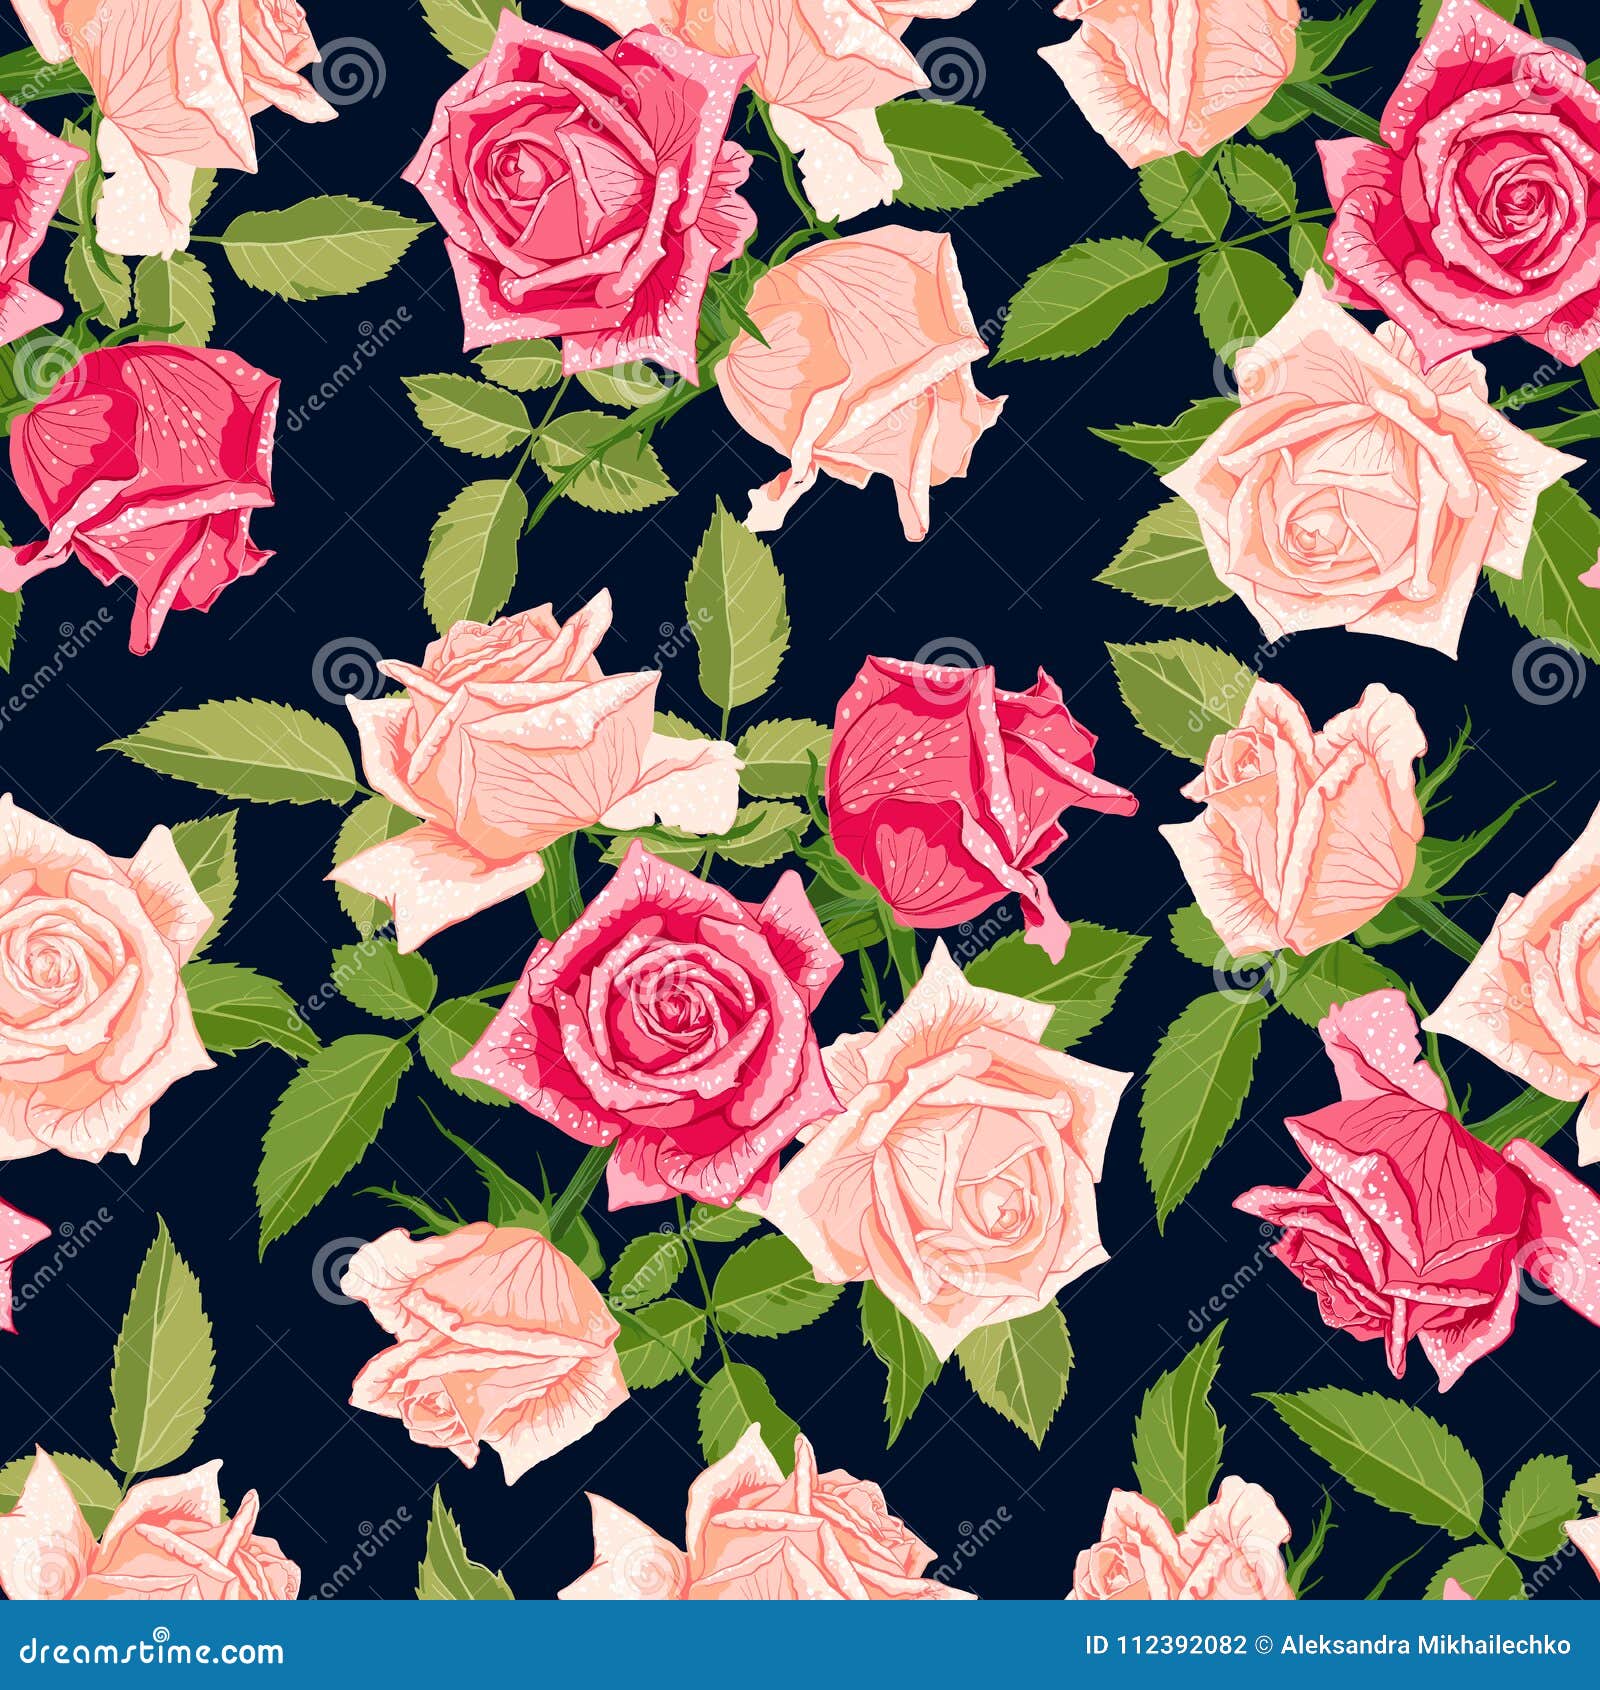 Seamless Floral Pattern with Roses. Stock Vector - Illustration of ...